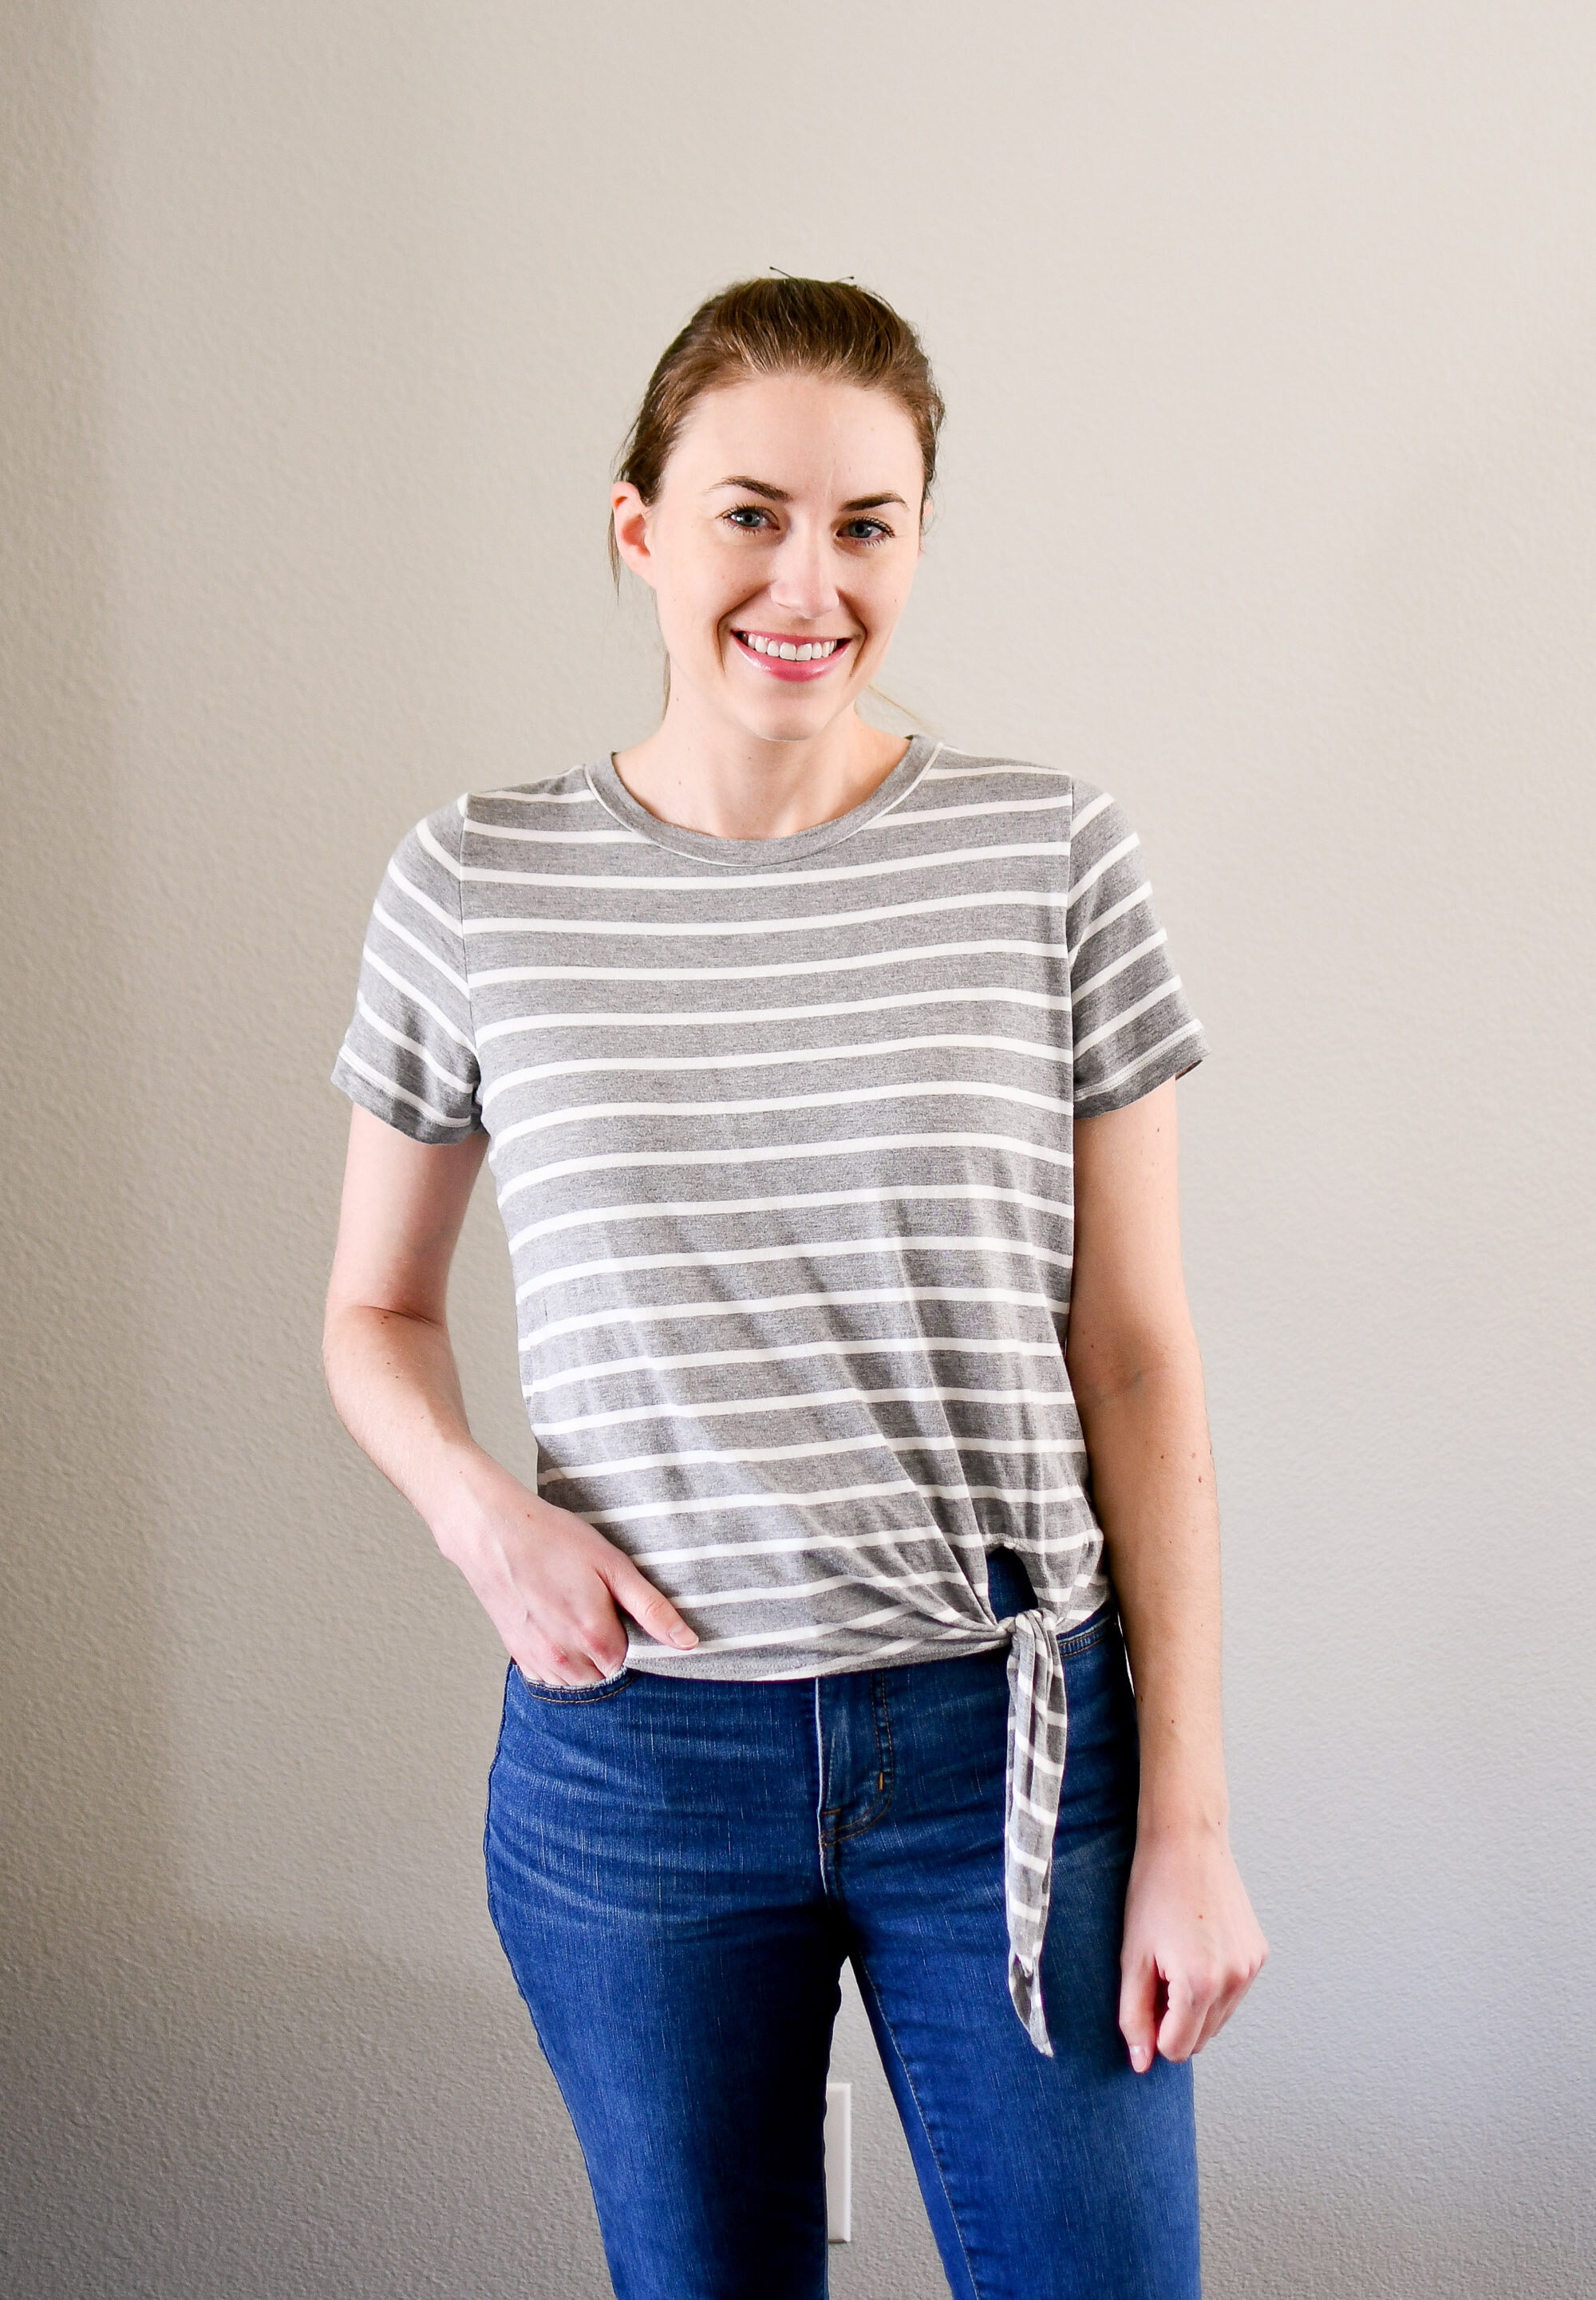 Amour Vert Julita grey modal striped side-tie tee review — Cotton Cashmere Cat Hair